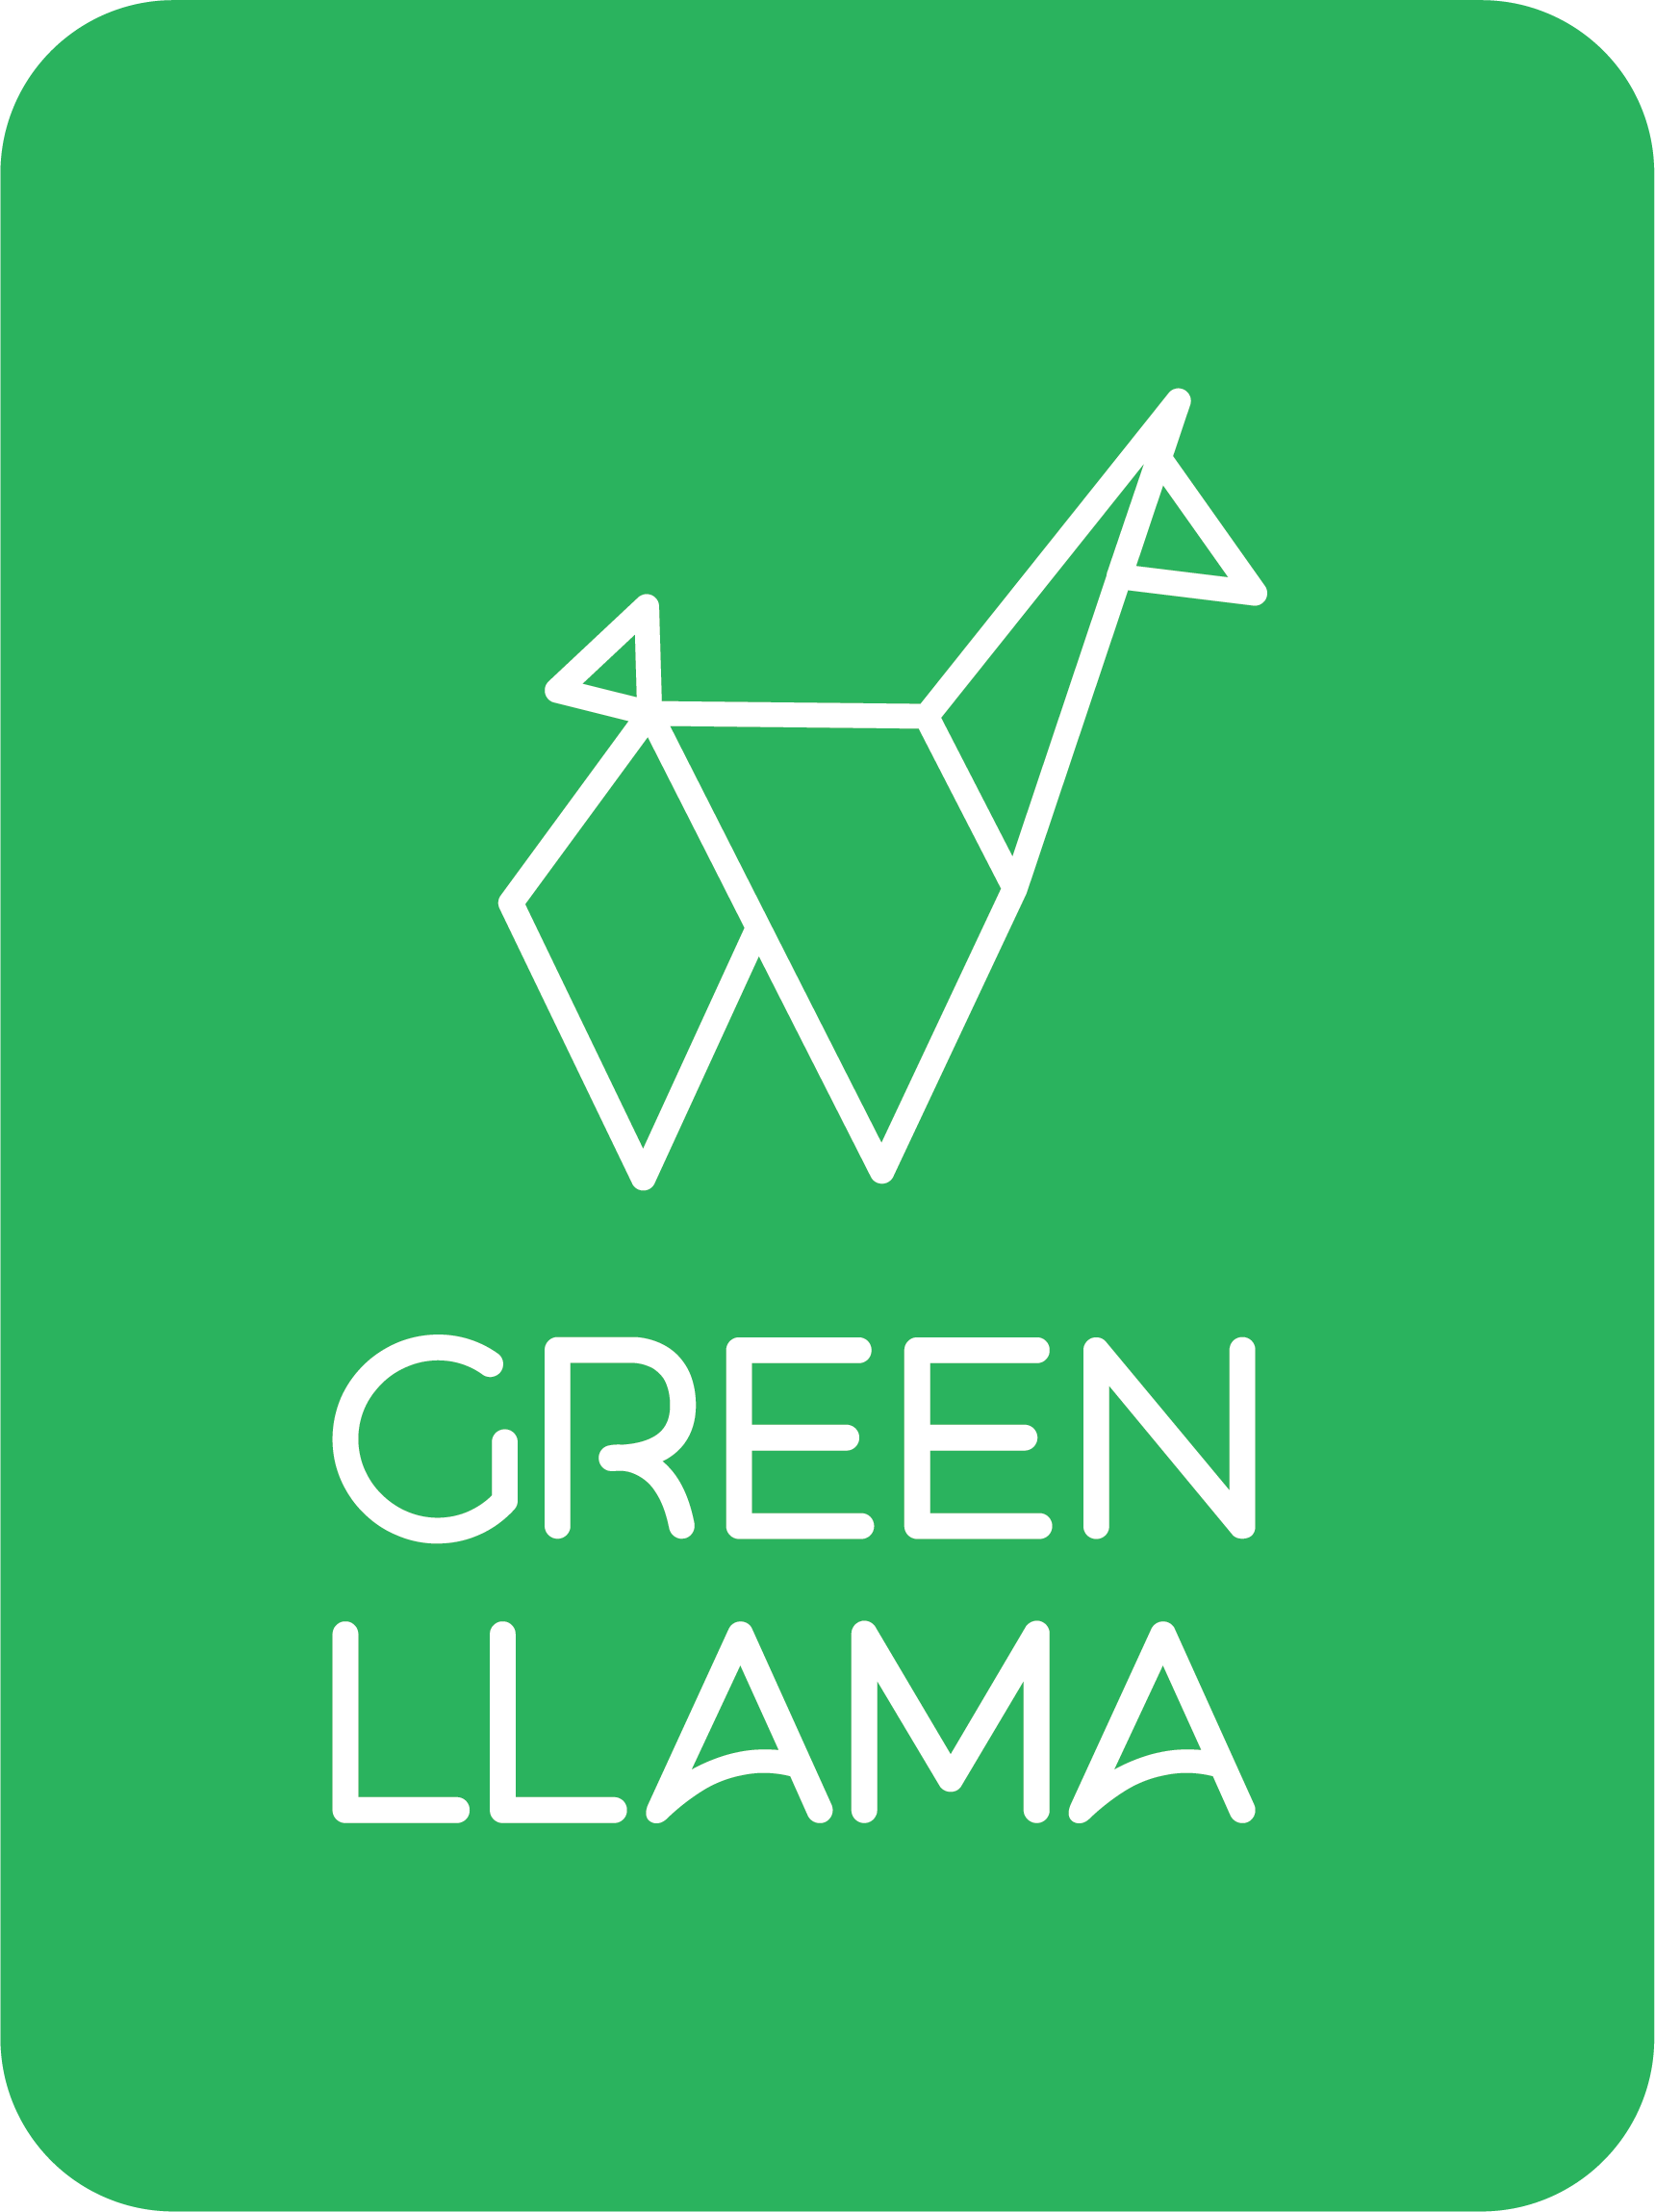 Green Llama is a Supplier of Eco-Friendly Cleaning Products